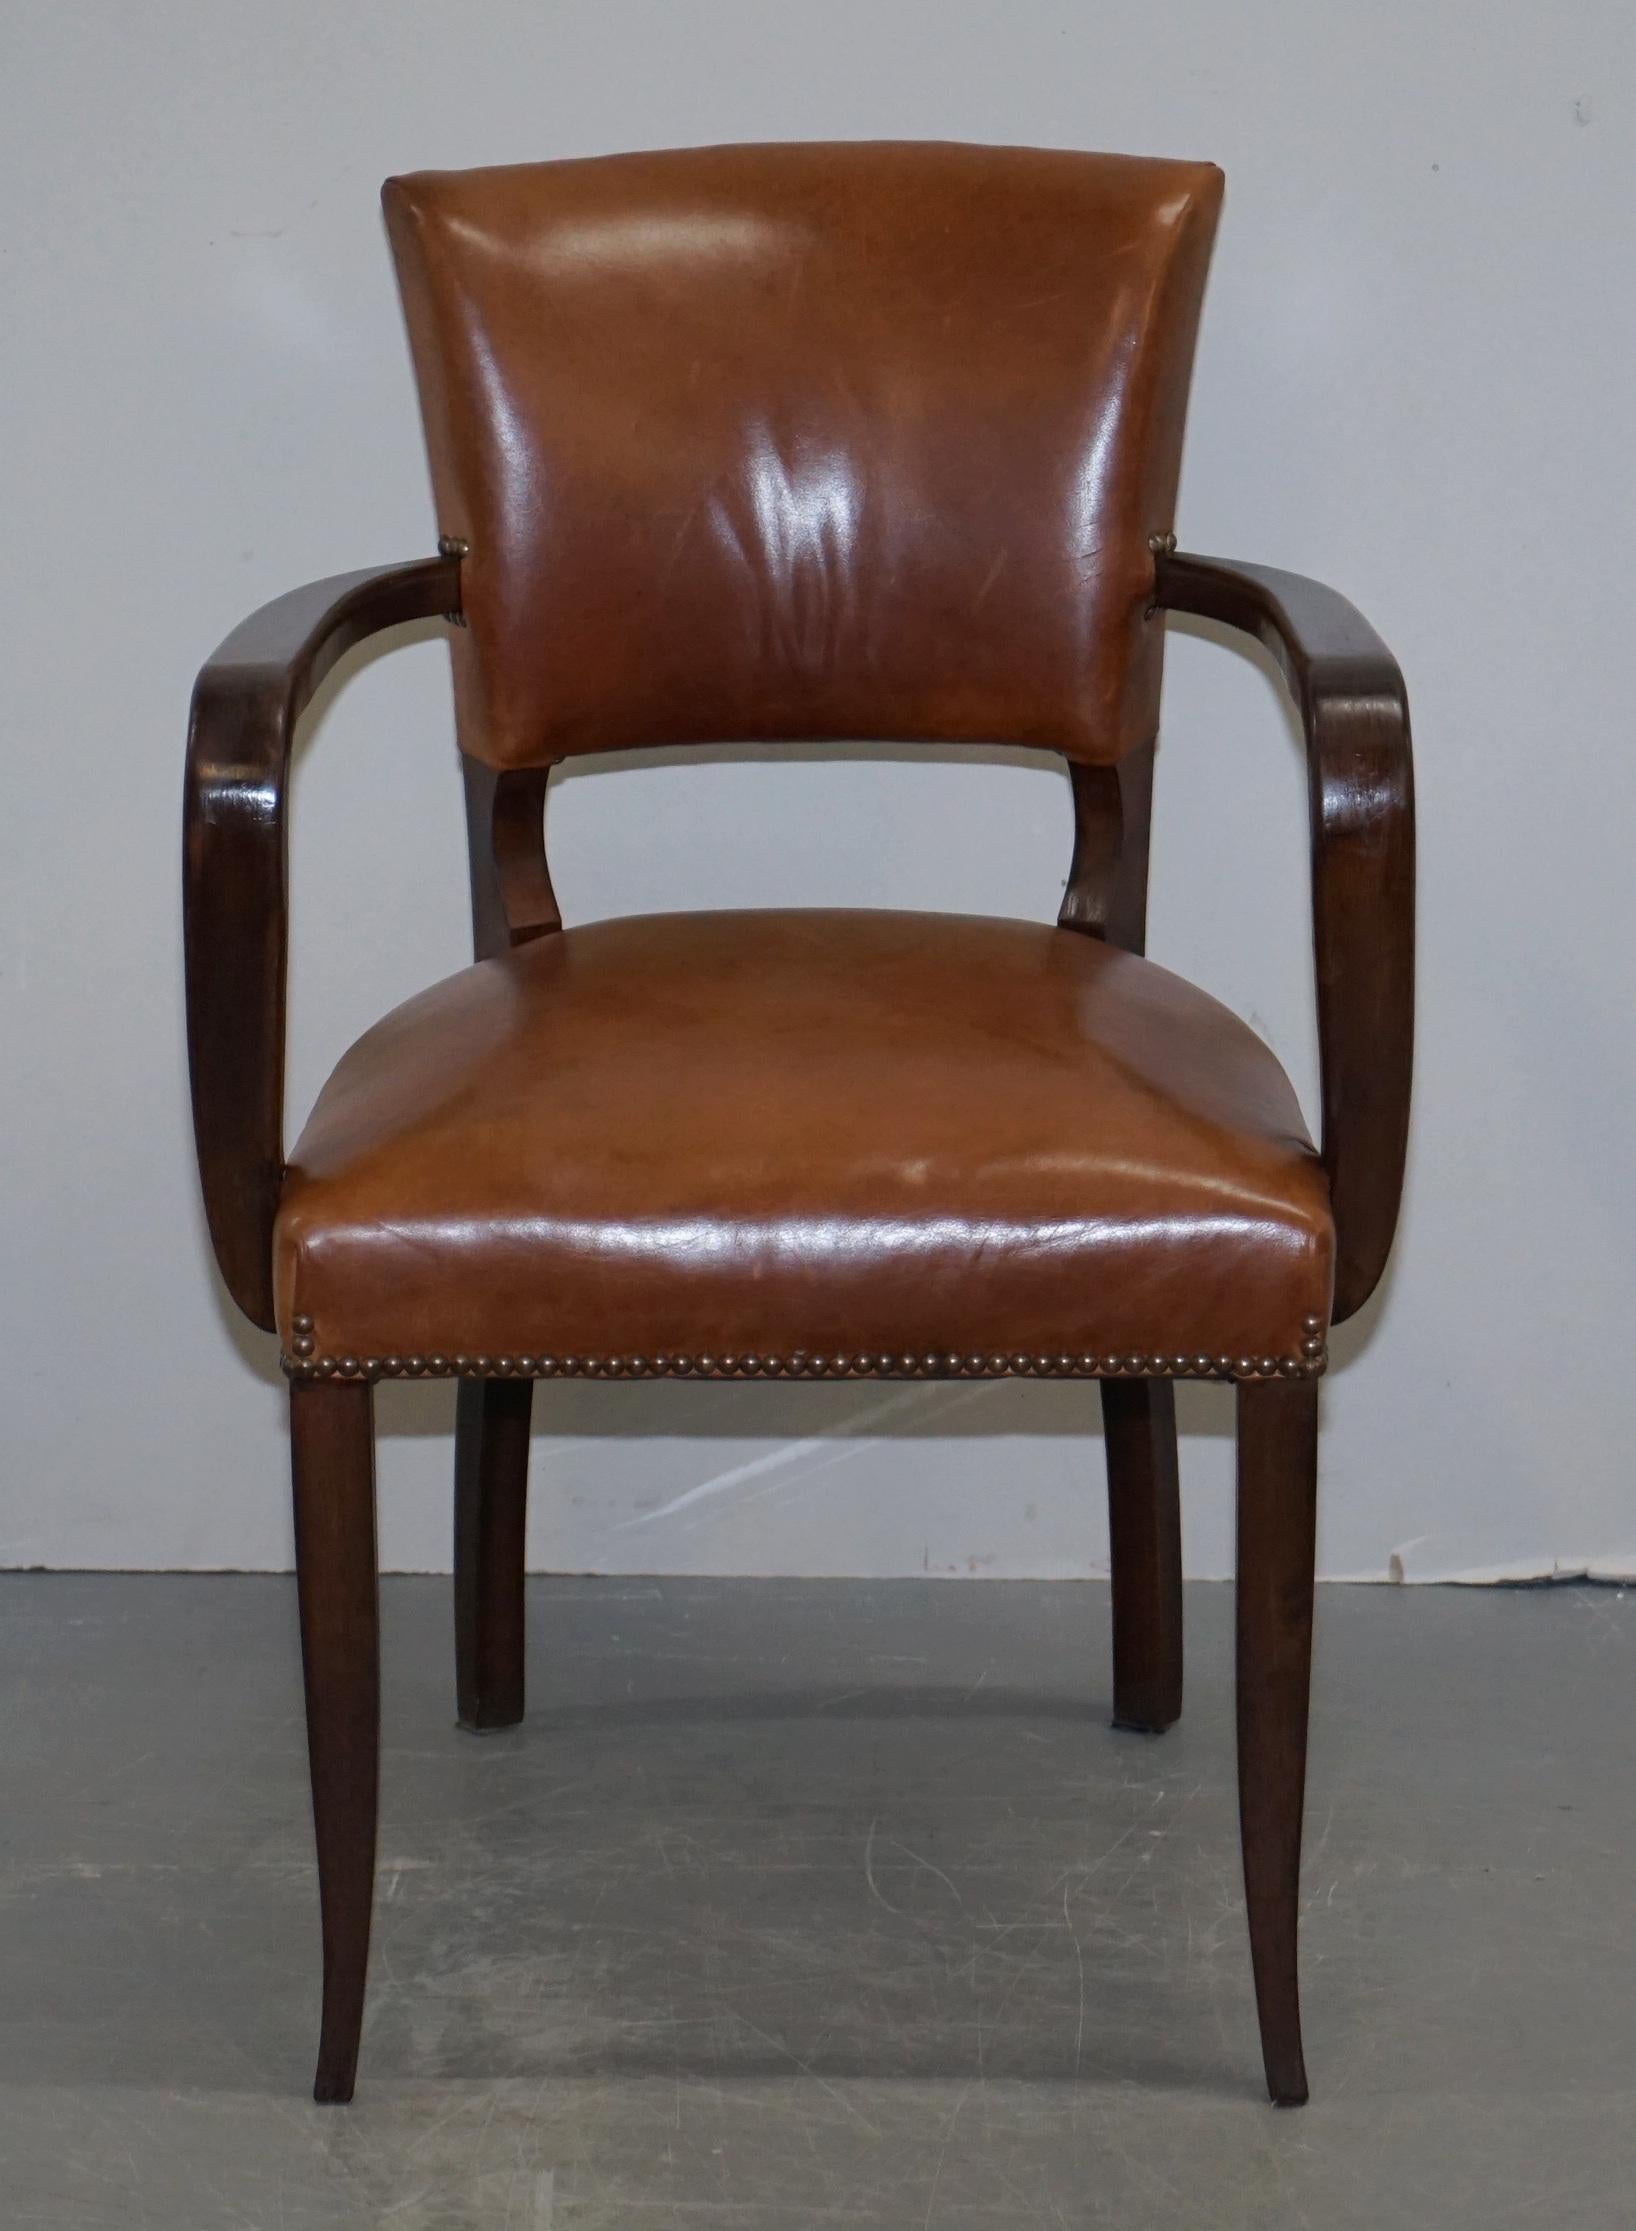 We are delighted to offer this lovely hand made in England George Smith Brown leather Bridge desk office armchair

A good looking well made and very decorative armchair, ideally suited to be used as a desk or captains chair

George Smith make